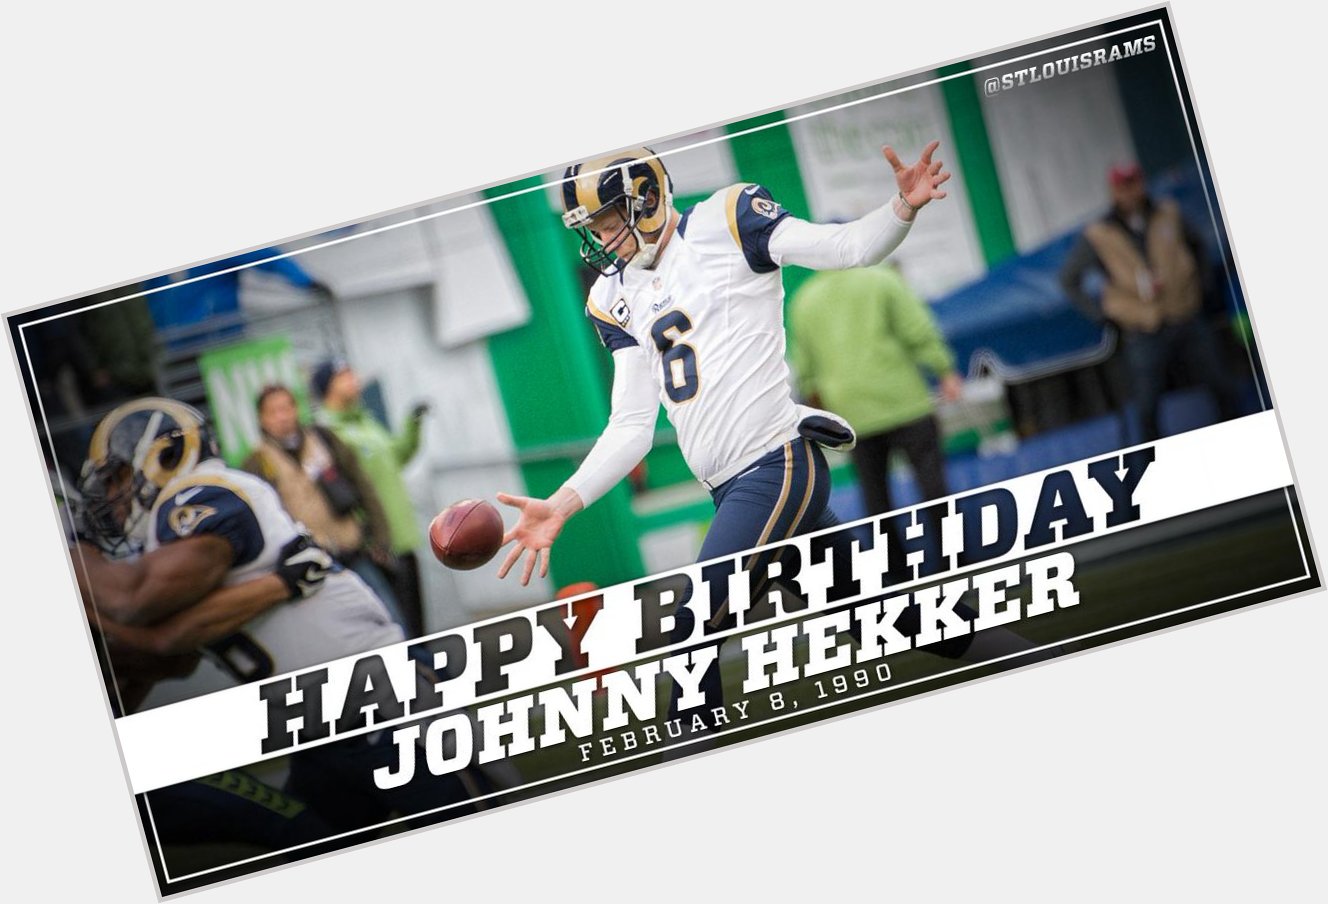   On this historic day, a legend was born. Happy Birthday JOHNNY HEKKER 2014 HIGHLIGHTS!